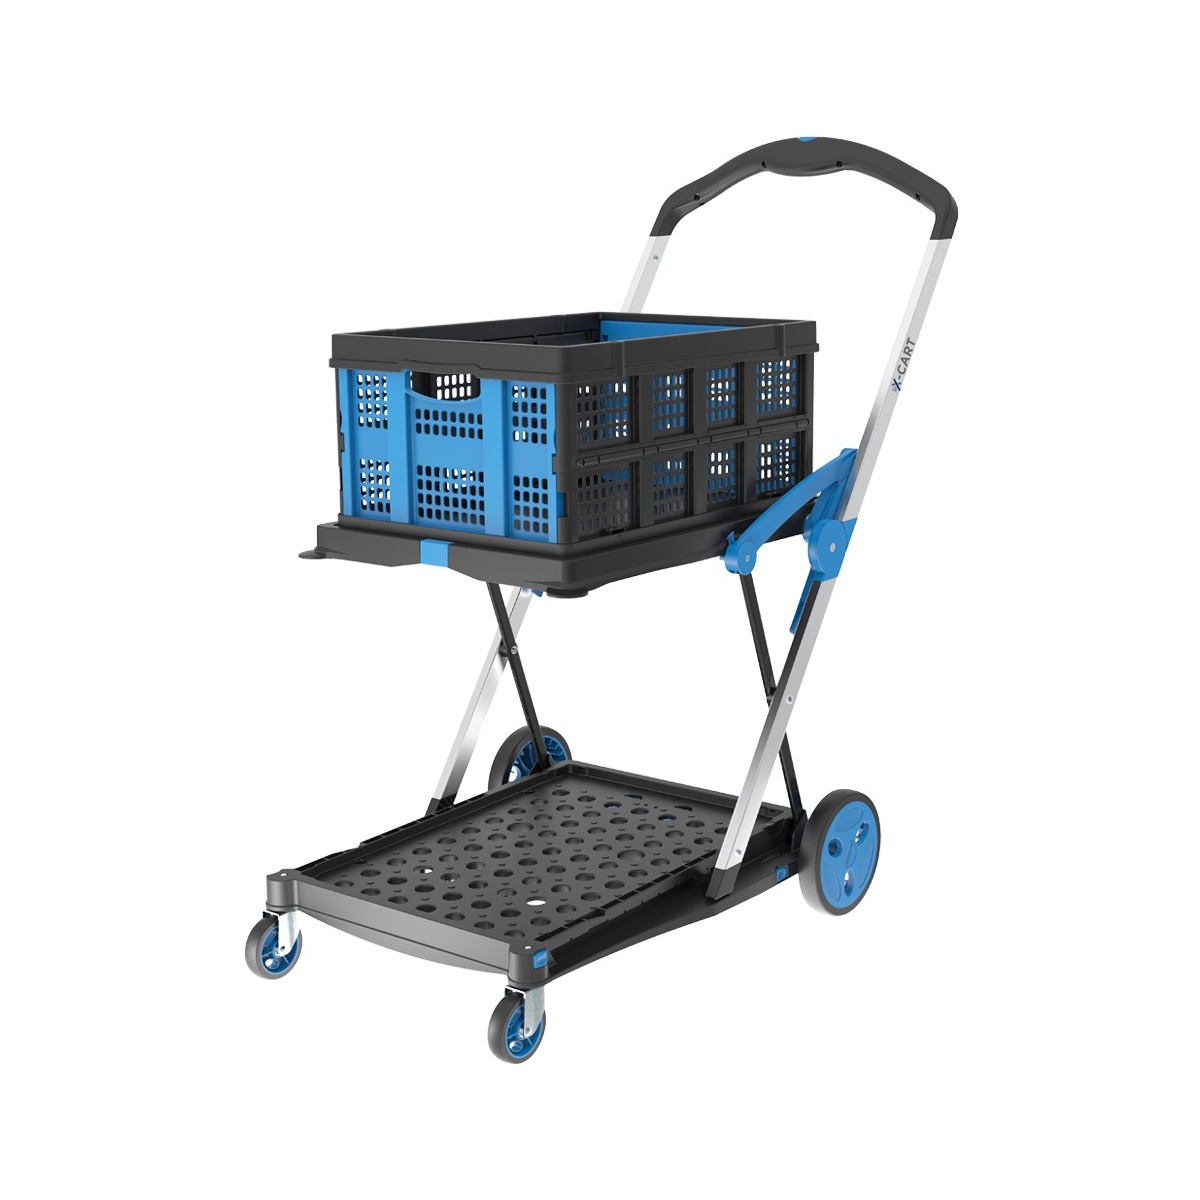 Buy X-Cart Folding Trolley Cart in Trolleys from Clax available at Astrolift NZ